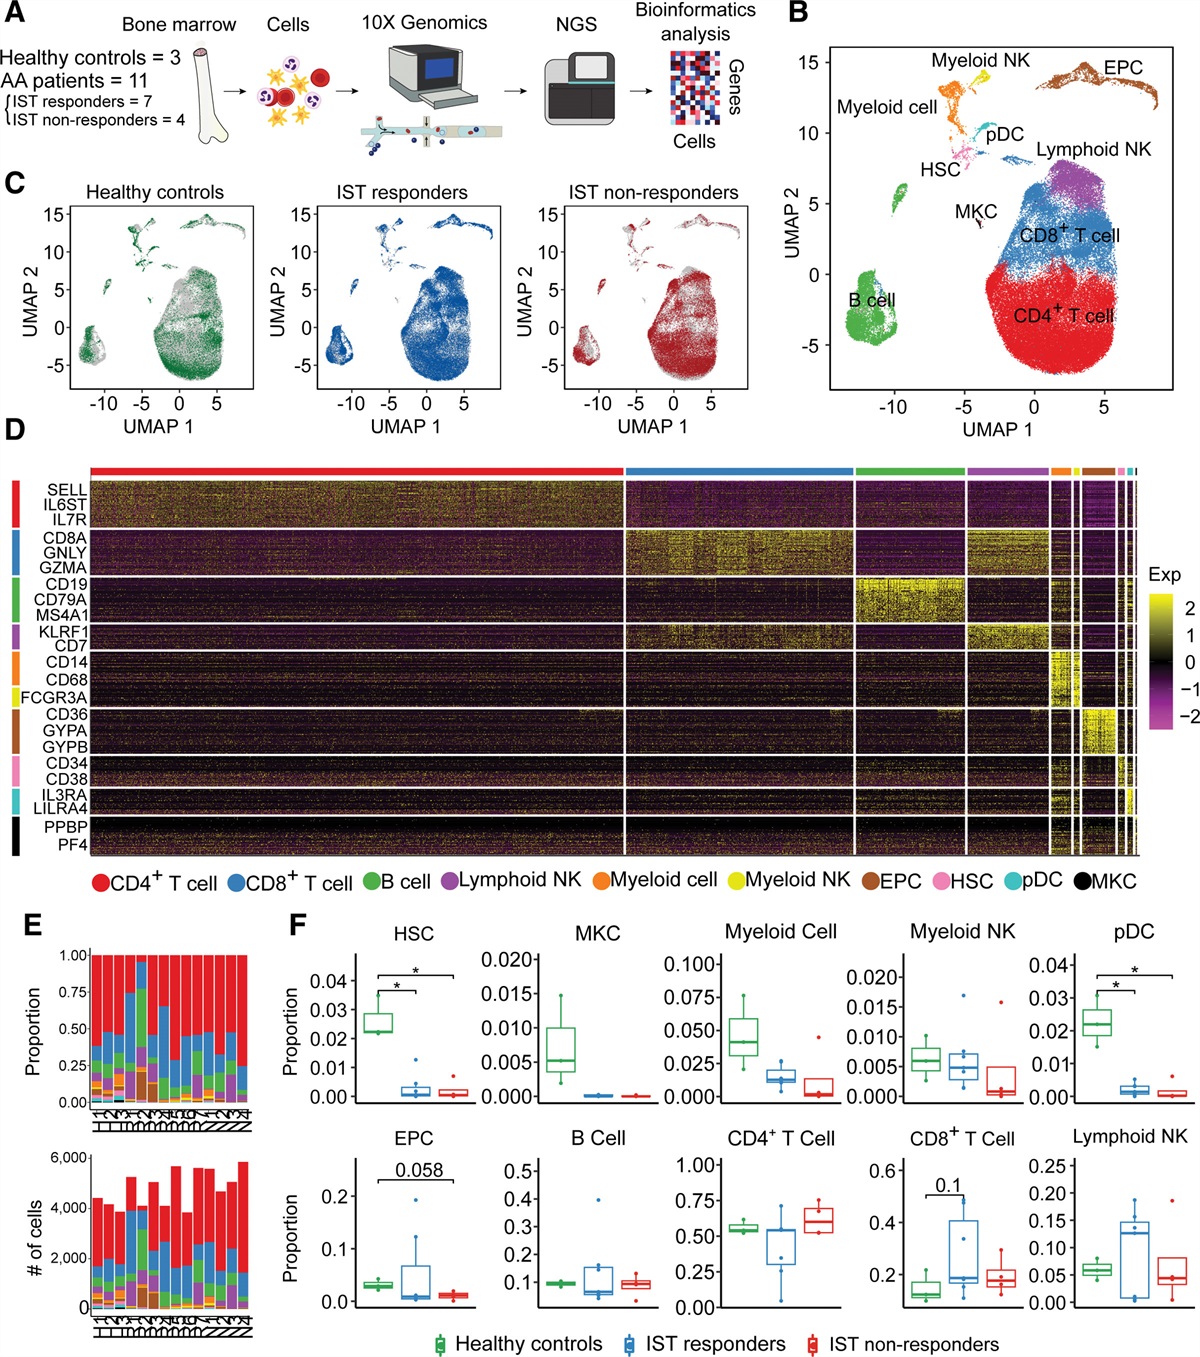 Single-cell RNA Sequencing Reveals Novel Cellular Factors for Response to Immunosuppressive Therapy in Aplastic Anemia